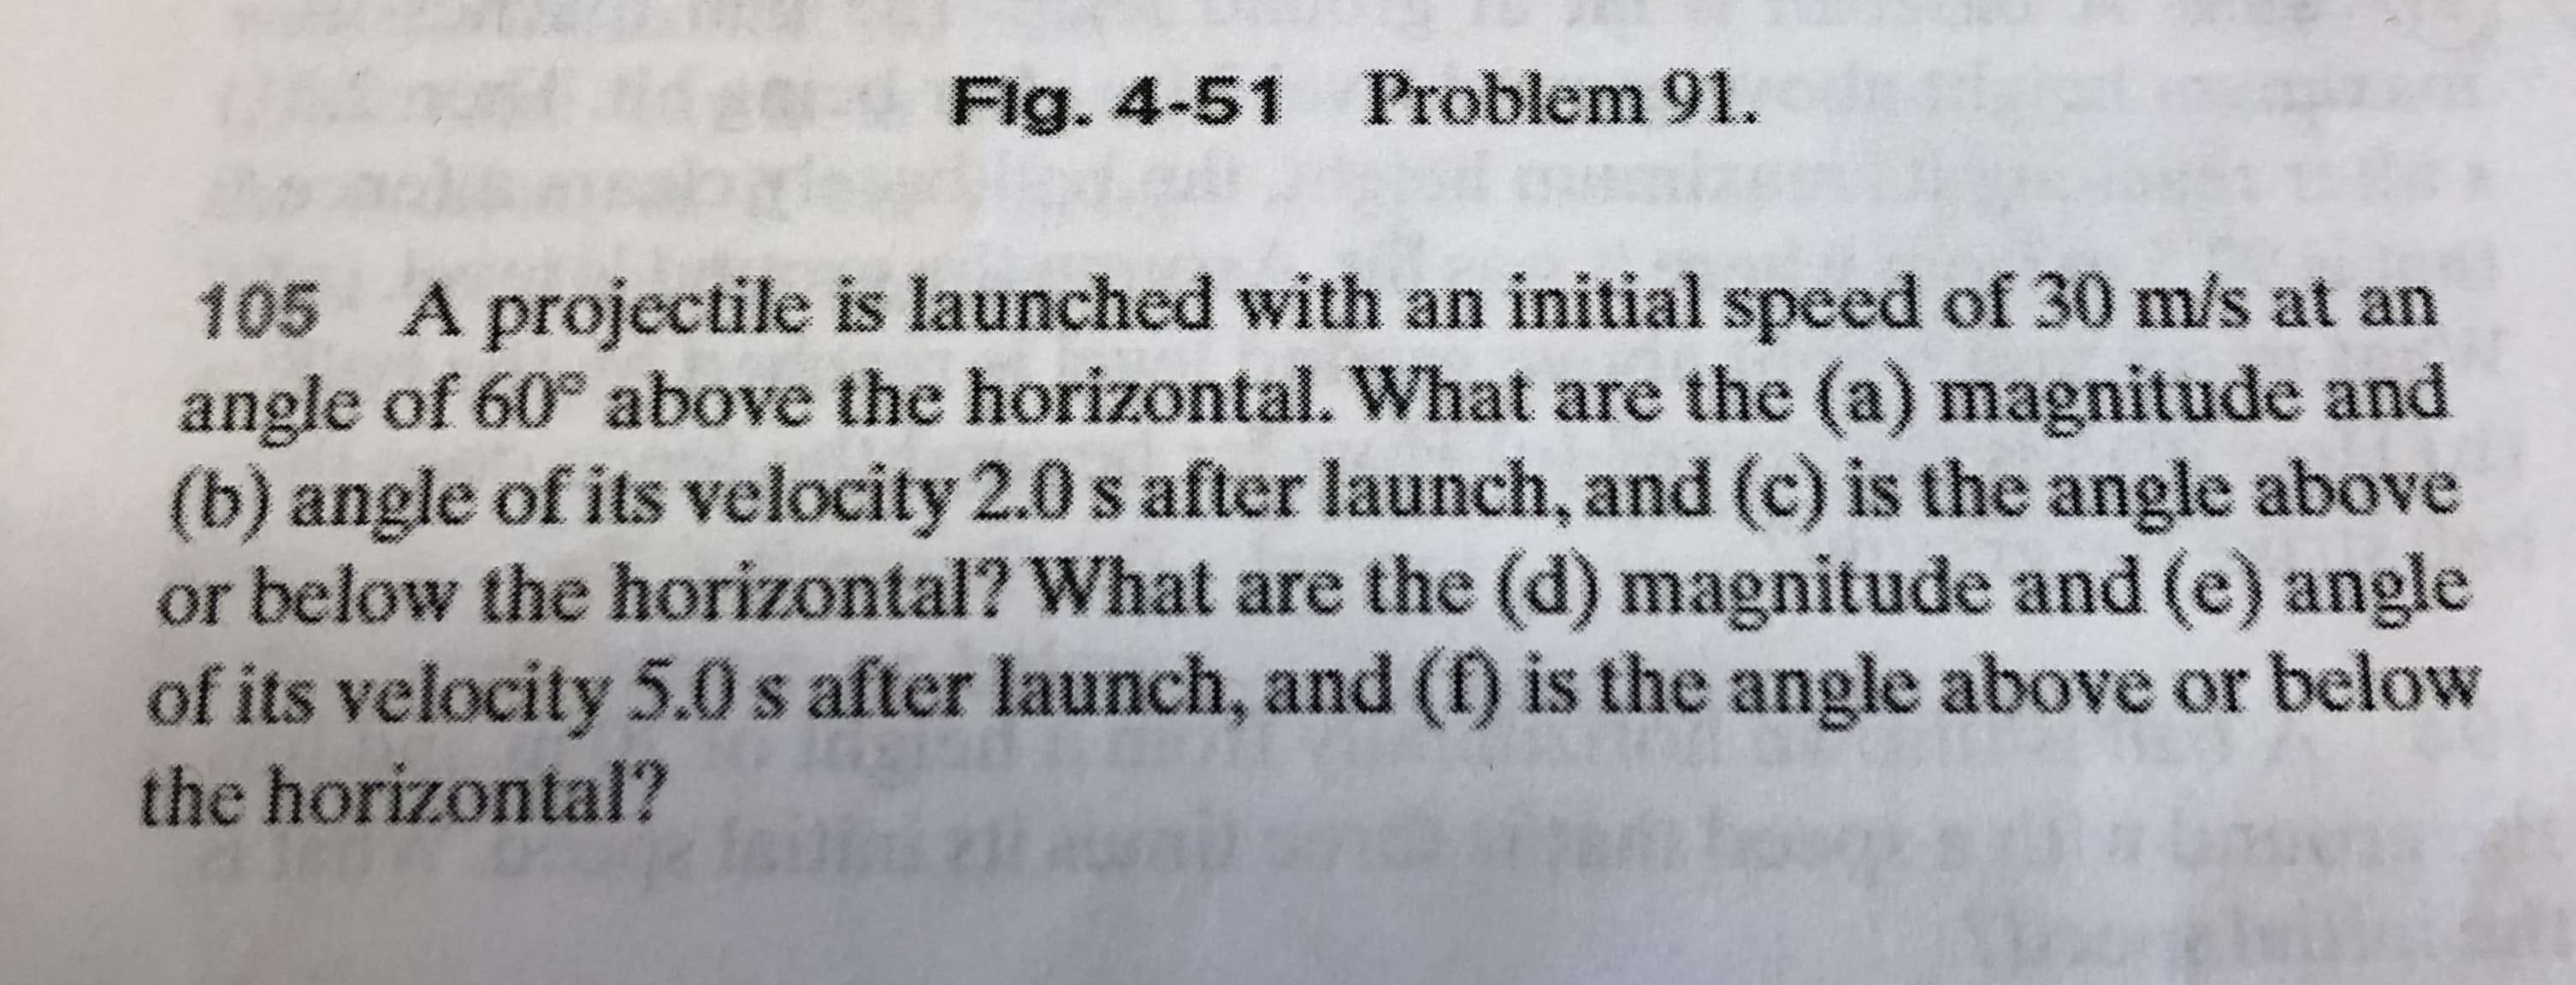 Flg. 4-51 Problem 91.
A projectile is launched with an initial speed of 30 m/s at an
angle of 60° above the horizontal. What are the (a) magnitude and
(b) angle of its velocity 2.0 s after launch, and (c) is the angle above
or below the horizontal? What are the (d) magnitude and (e) angle
of its velocity 5.0 s after launch, and (f) is the angle above or below
105
the horizontal?
